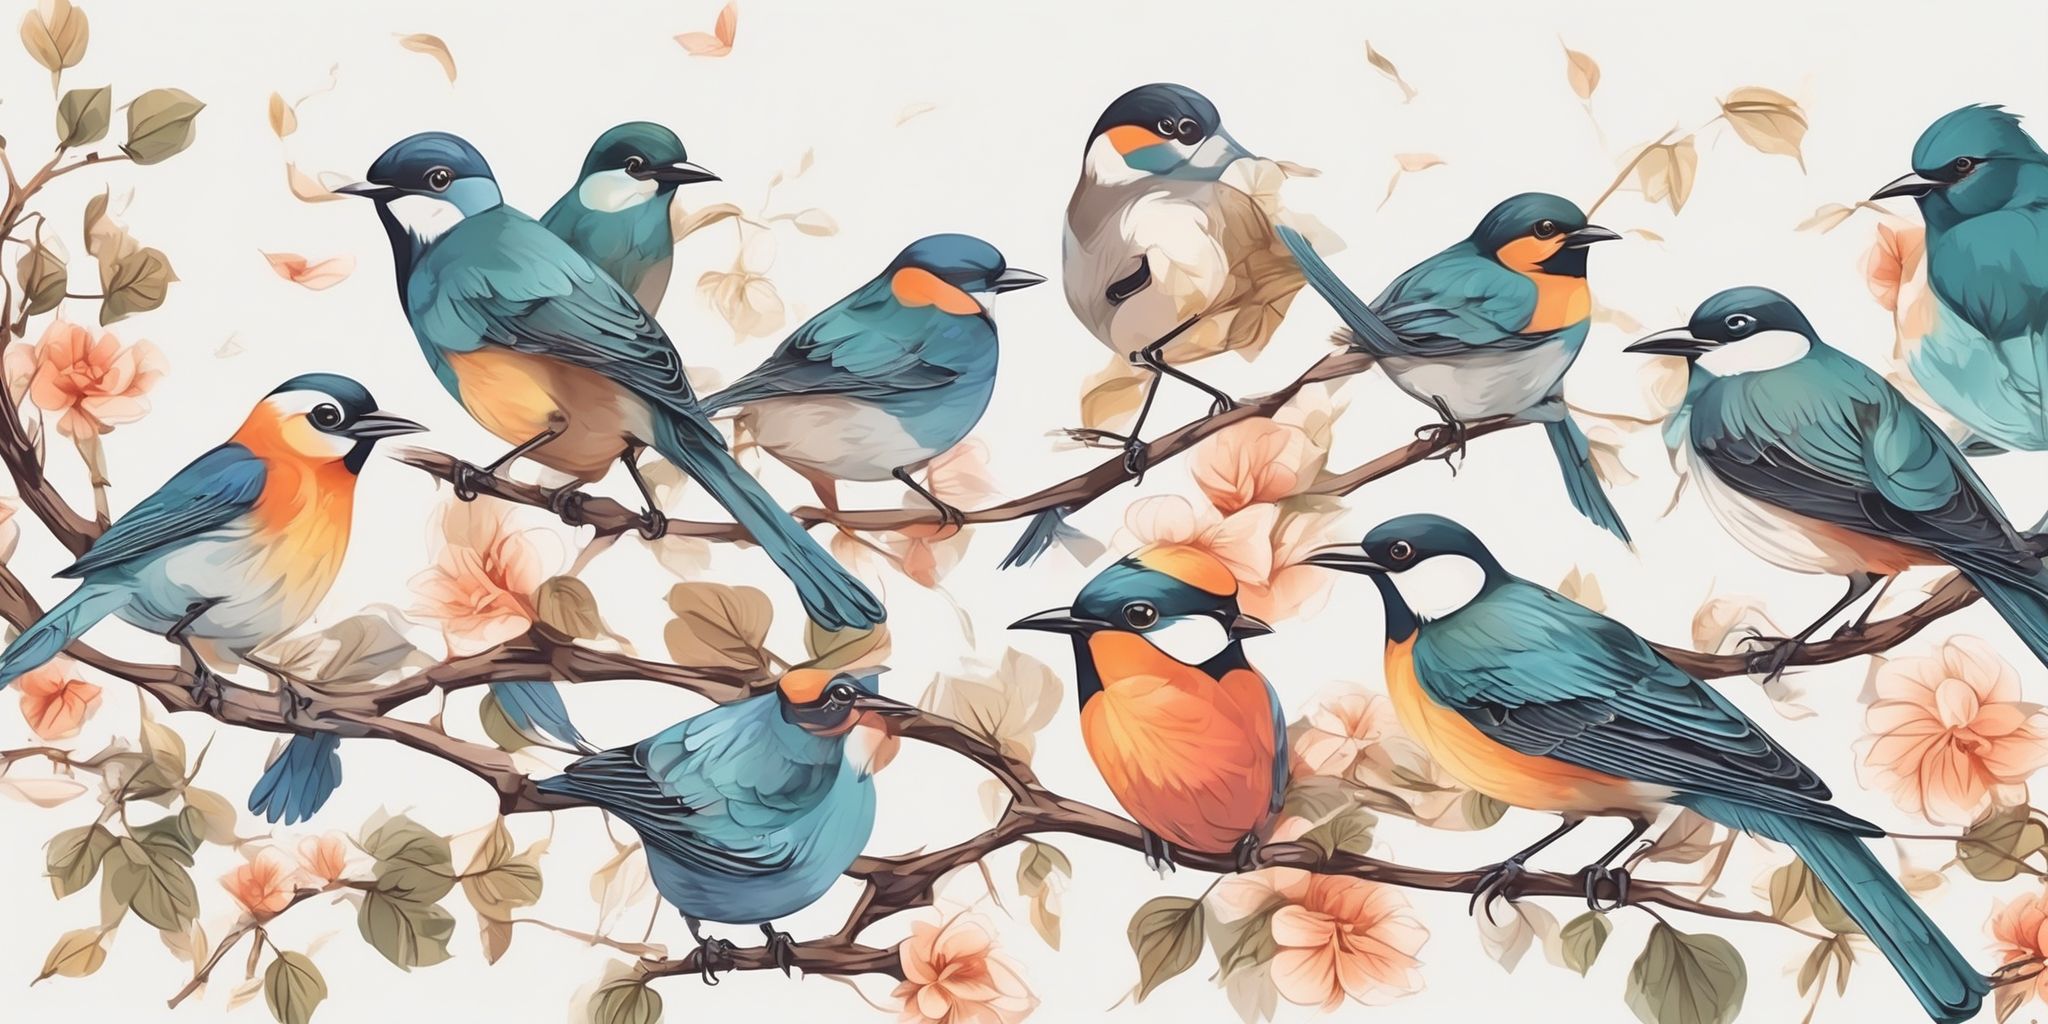 birds in illustration style with gradients and white background